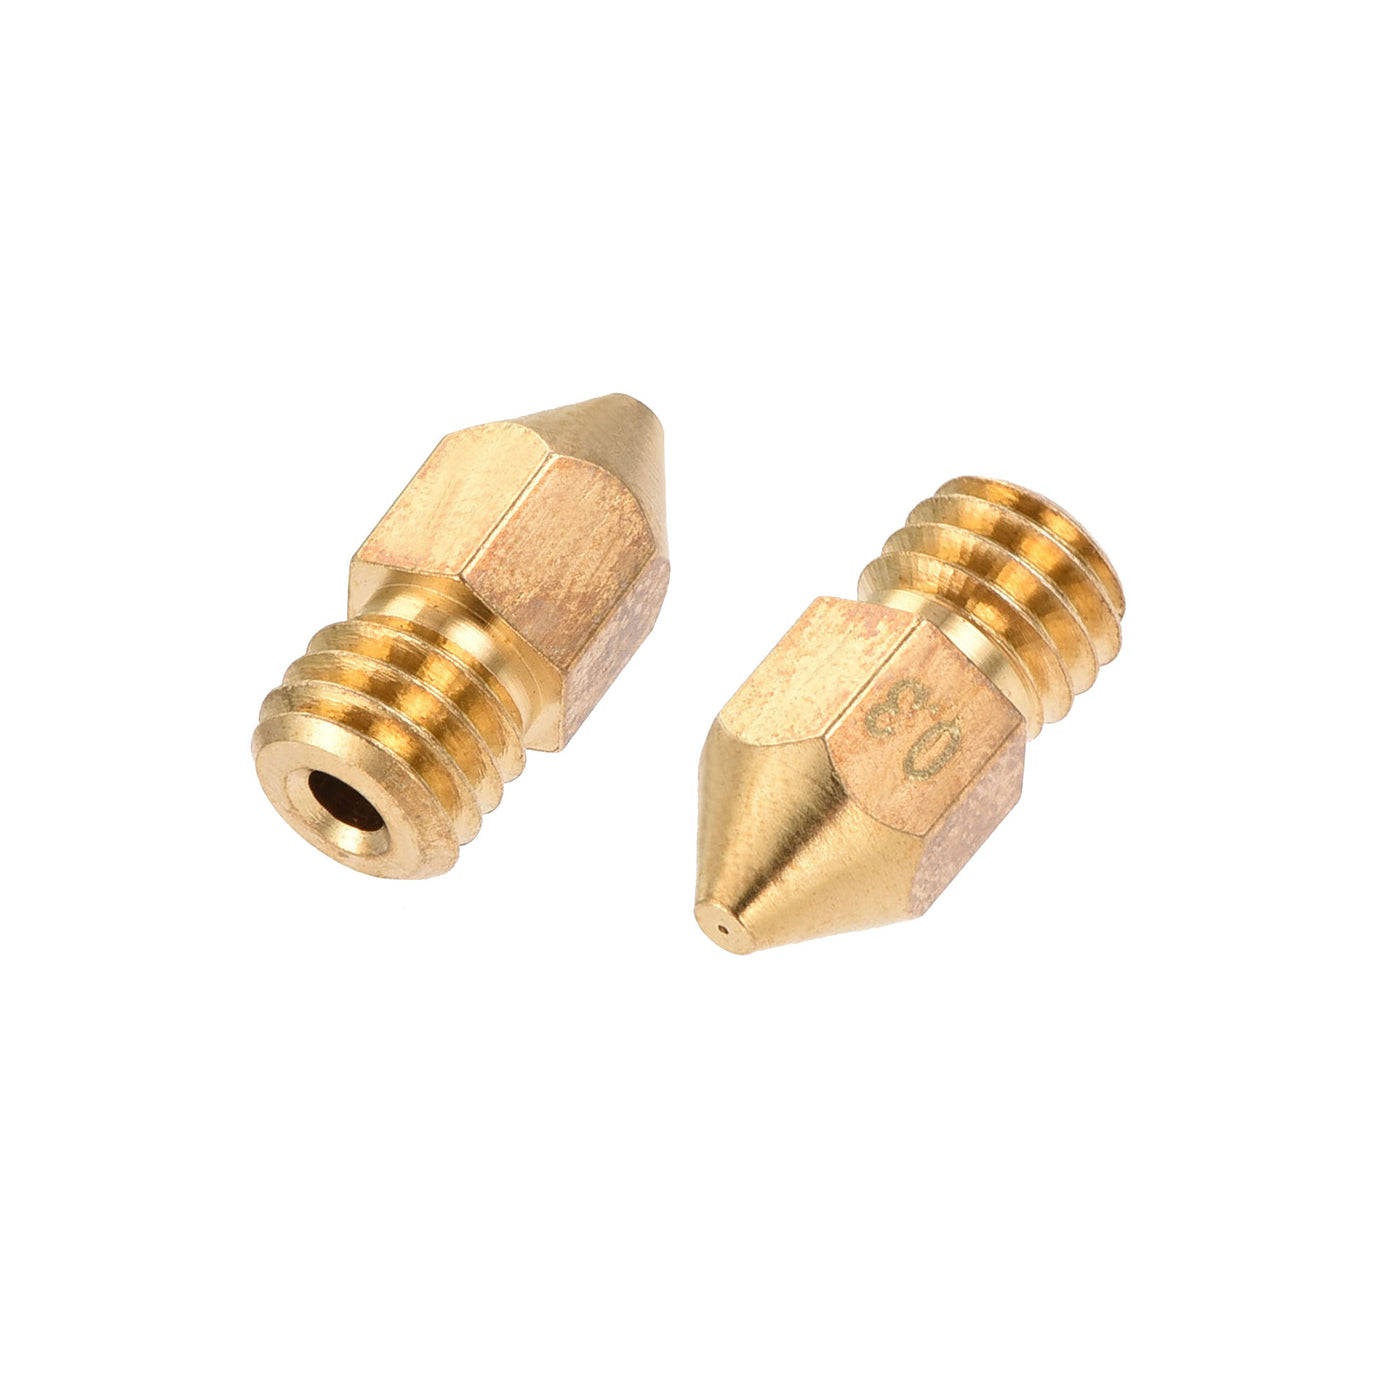 uxcell Uxcell 0.3mm 3D Printer Nozzle, 24pcs M6 Thread for MK8 1.75mm Extruder Print, Brass